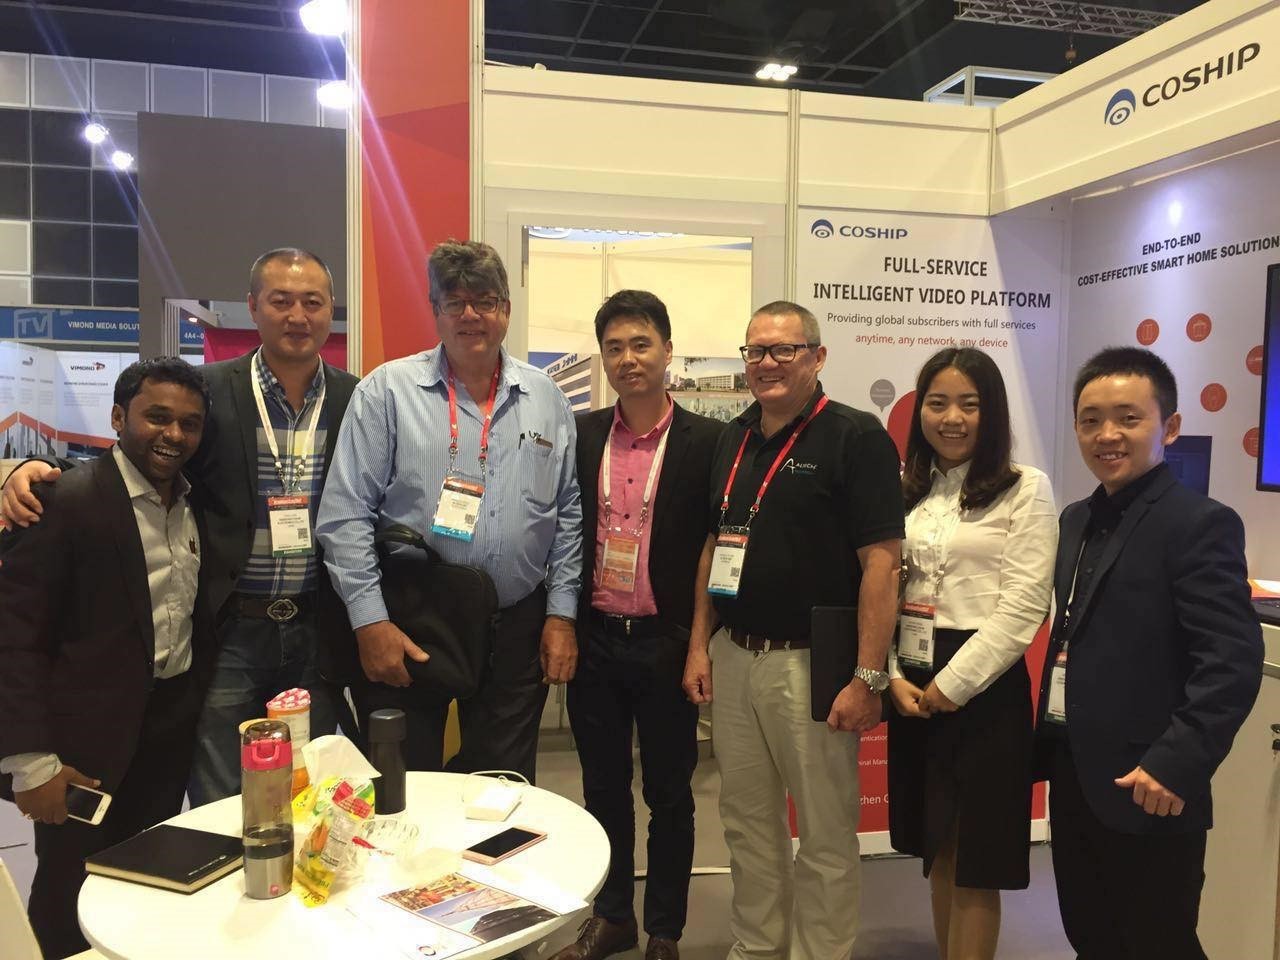 Tongzhou Electronics made a wonderful appearance at the Singapore Radio and Television Exhibition